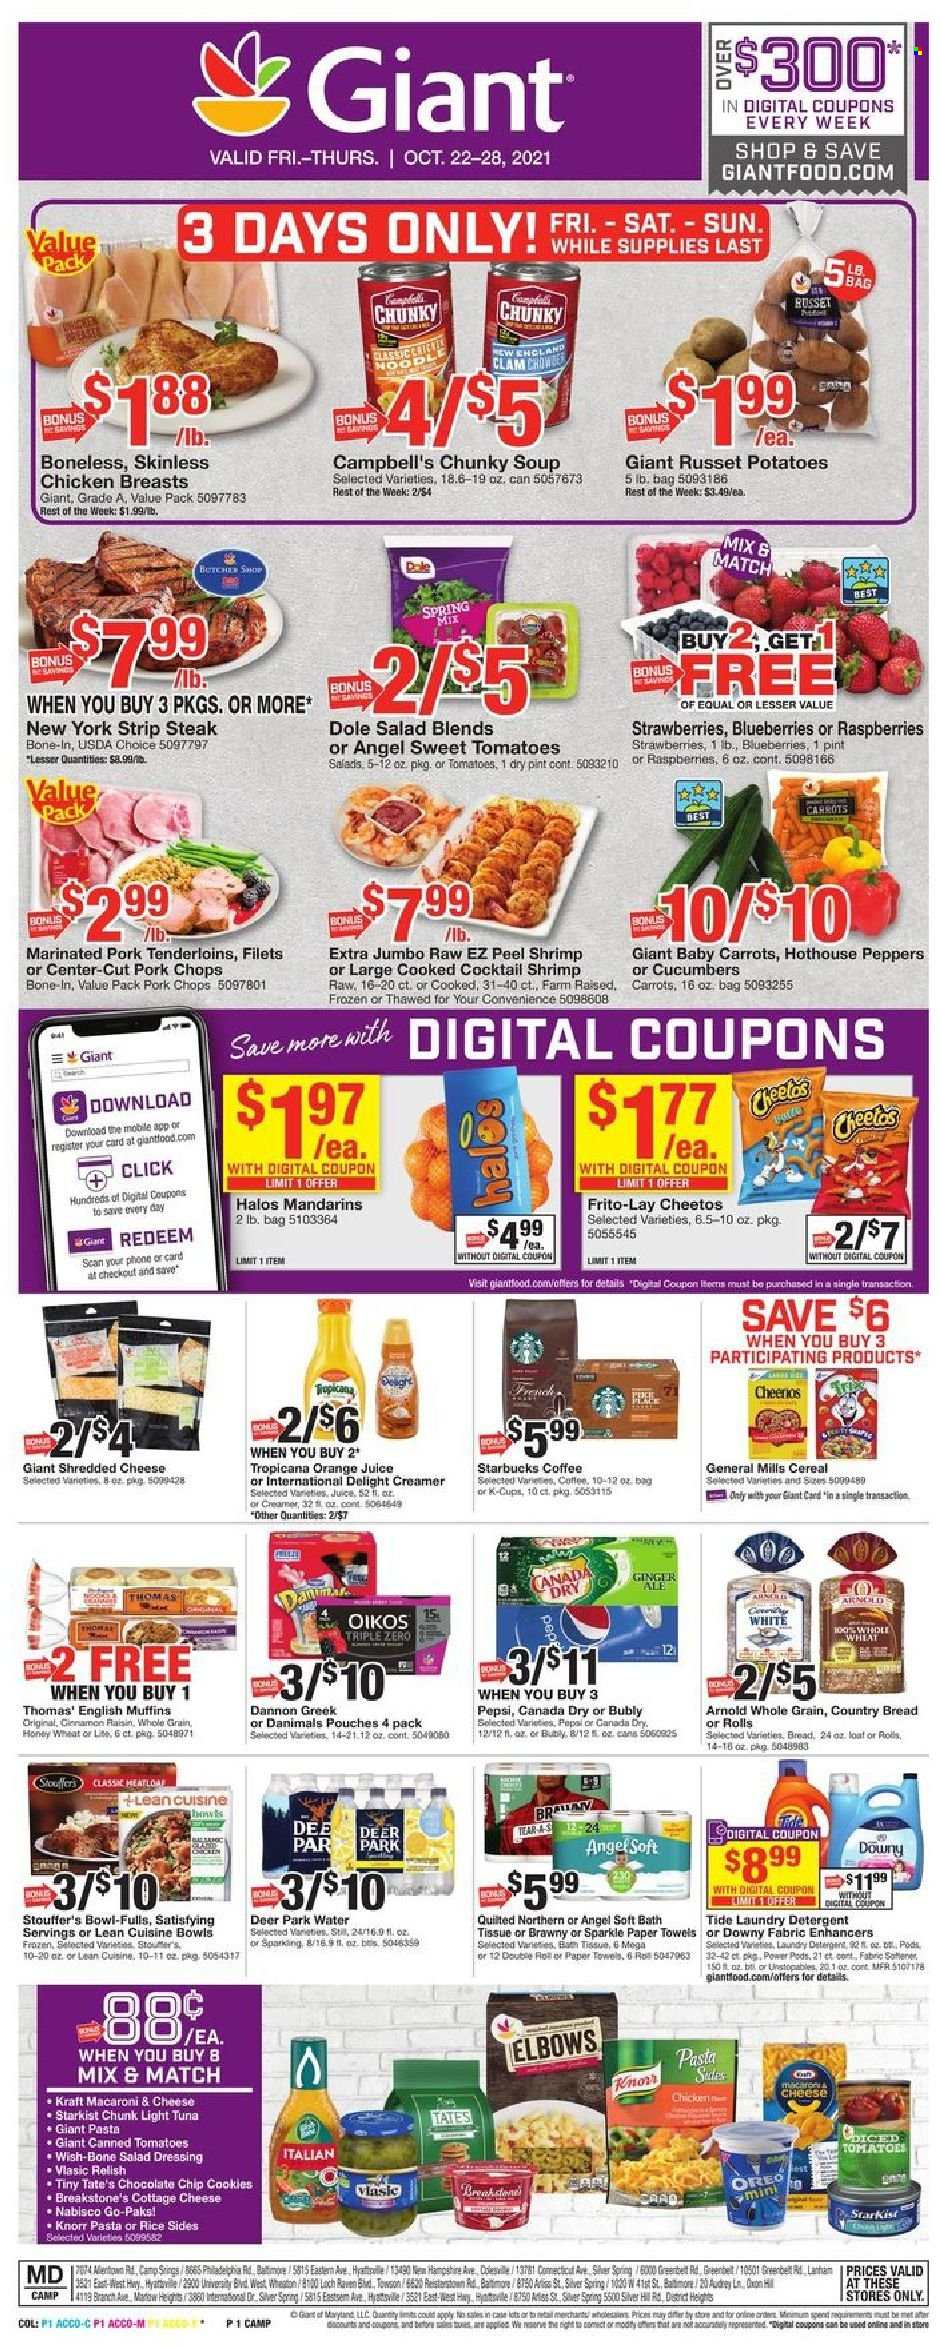 thumbnail - Giant Food Flyer - 10/22/2021 - 10/28/2021 - Sales products - english muffins, ginger, russet potatoes, potatoes, Dole, peppers, blueberries, mandarines, strawberries, clams, tuna, shrimps, StarKist, Campbell's, macaroni & cheese, soup, Knorr, Lean Cuisine, bowl-fulls, Kraft®, cottage cheese, shredded cheese, Oreo, Oikos, Dannon, Danimals, creamer, Stouffer's, cookies, Cheetos, Frito-Lay, light tuna, cereals, rice, salad dressing, dressing, honey, Canada Dry, Pepsi, orange juice, juice, coffee, Starbucks, coffee capsules, K-Cups, chicken breasts, beef meat, steak, striploin steak, pork chops, pork meat, pork tenderloin, marinated pork, bath tissue, kitchen towels, paper towels, detergent, Tide, Unstopables, laundry detergent, Downy Laundry. Page 1.